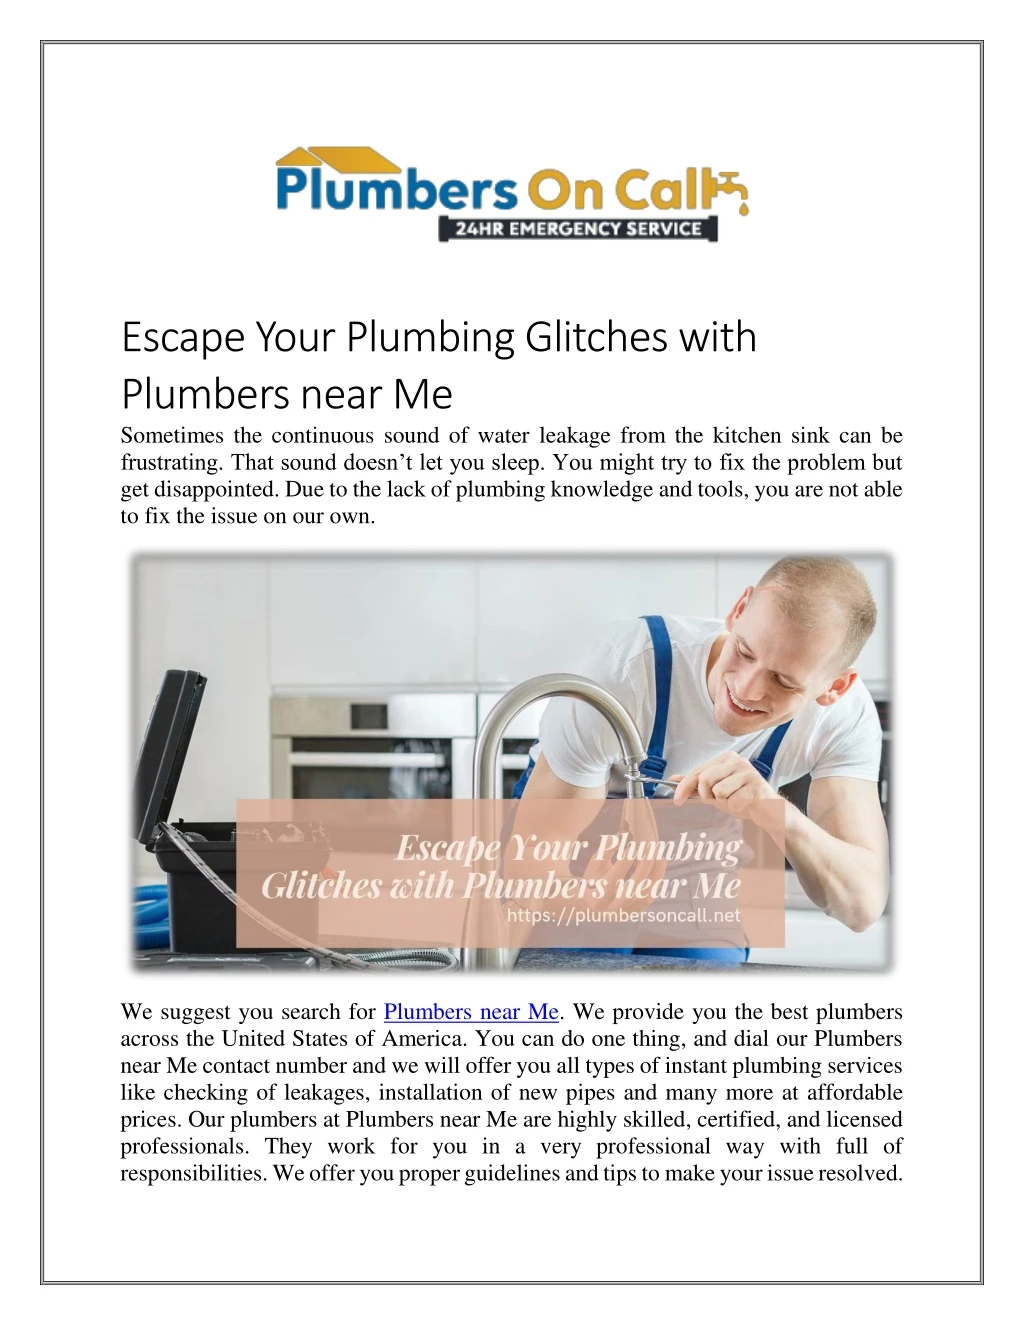 escape your plumbing glitches with plumbers near